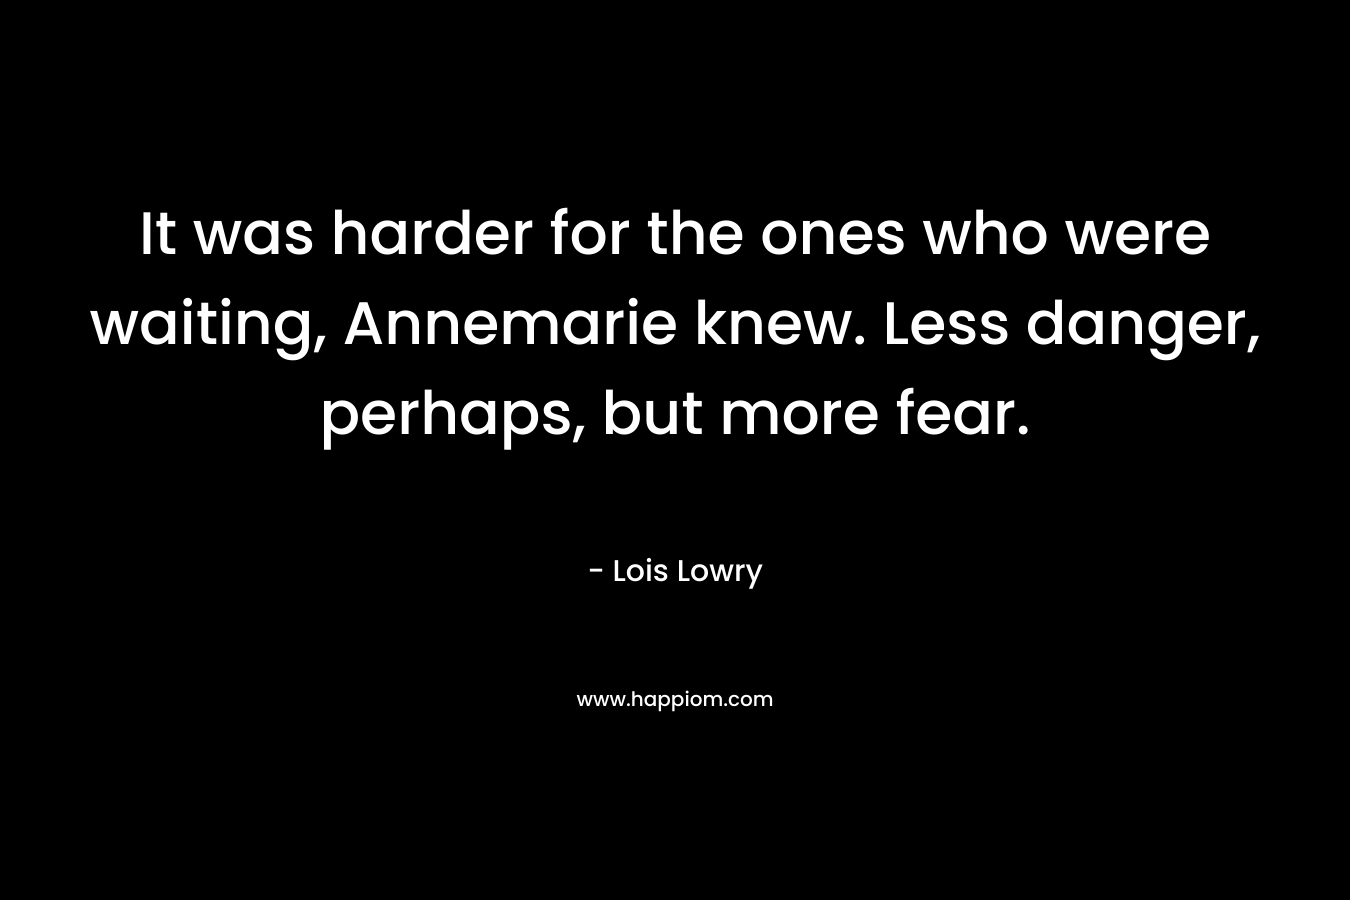 It was harder for the ones who were waiting, Annemarie knew. Less danger, perhaps, but more fear. – Lois Lowry